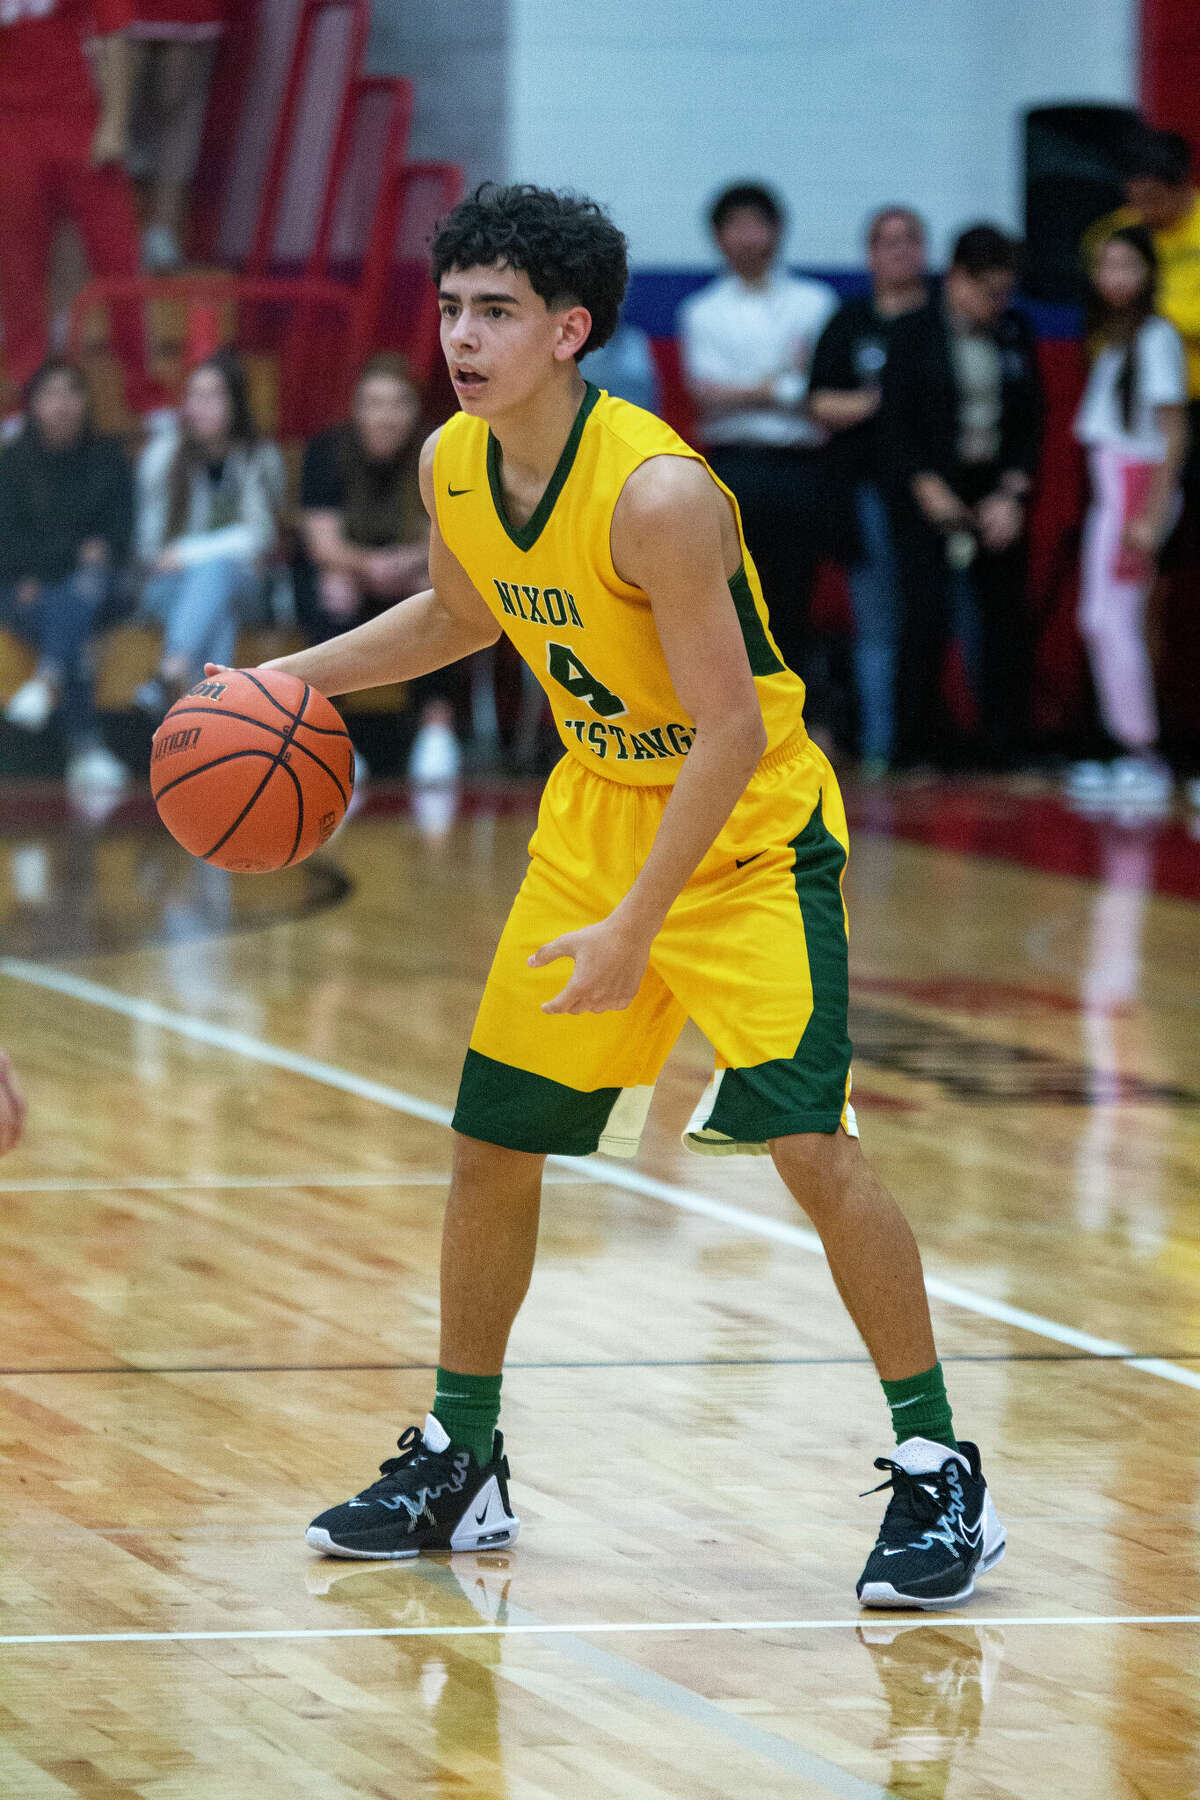 Mason Vela and the Nixon Mustangs defeated the Martin Tigers on Tuesday.